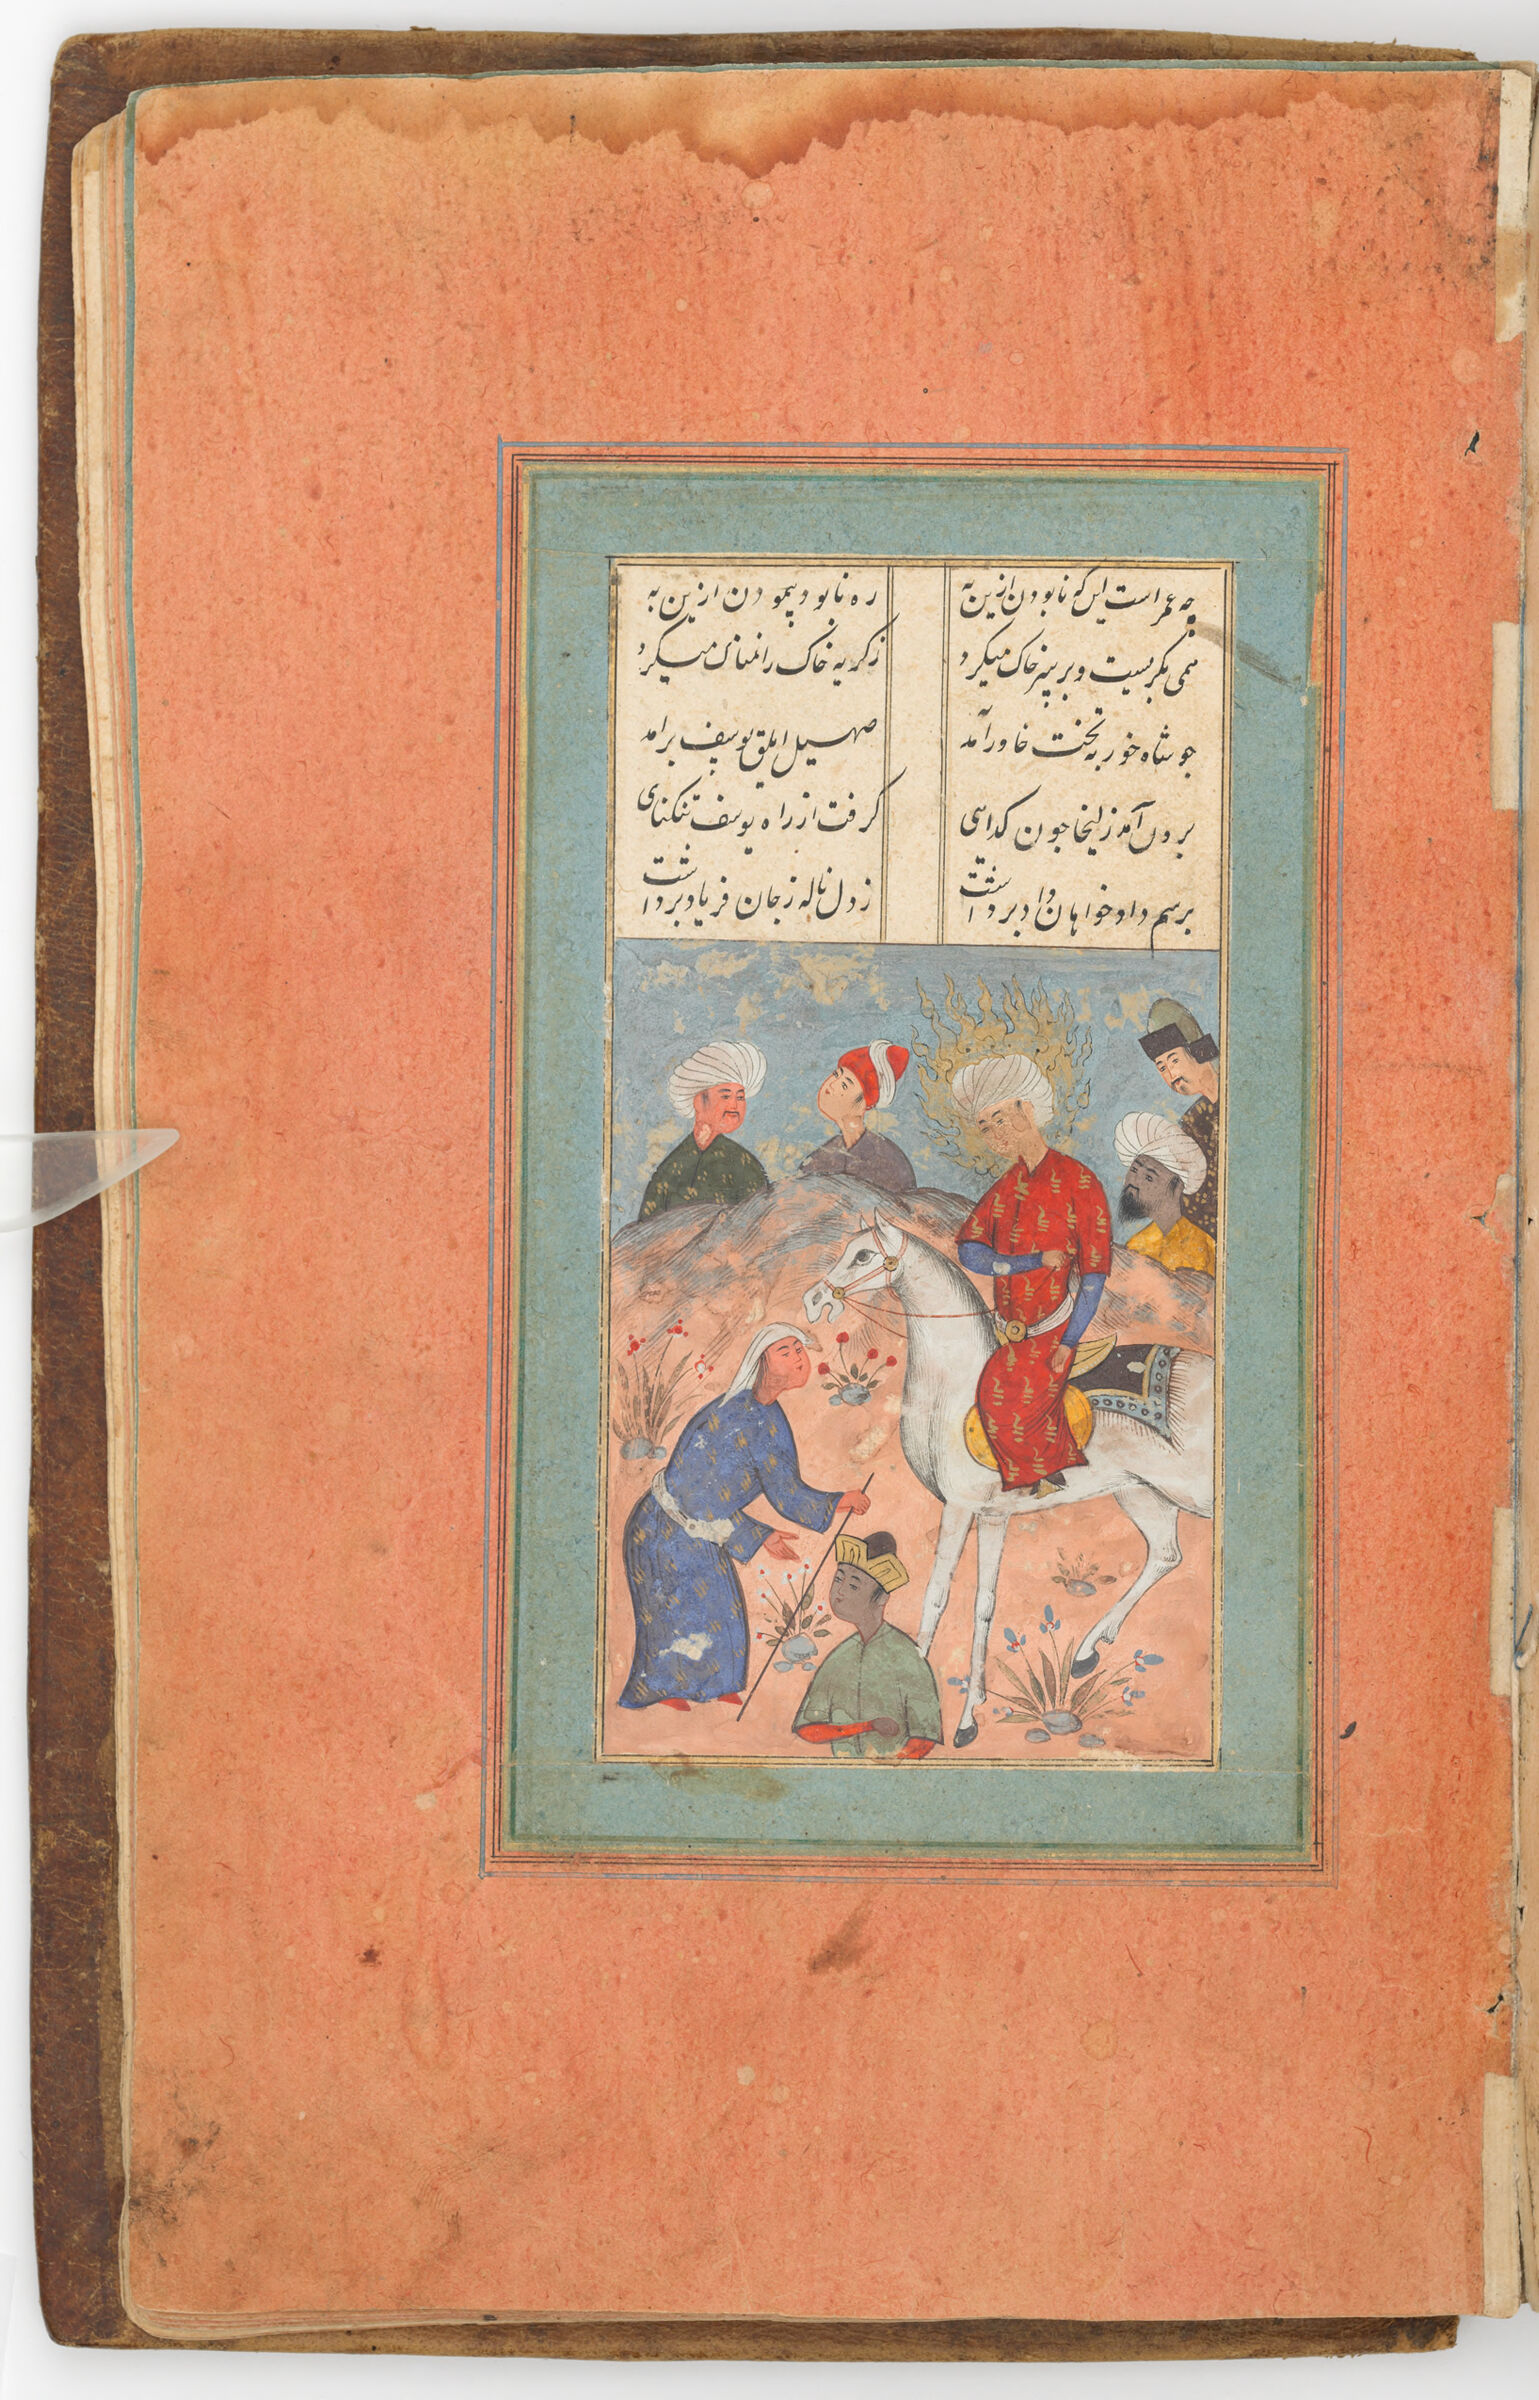 Zulaykha Stops Yusuf As A Beggar (Painting Recto; Text Verso Of Folio 113); Illustrated Folio From A Manuscript Of Yusuf And Zulaykha By Nizami